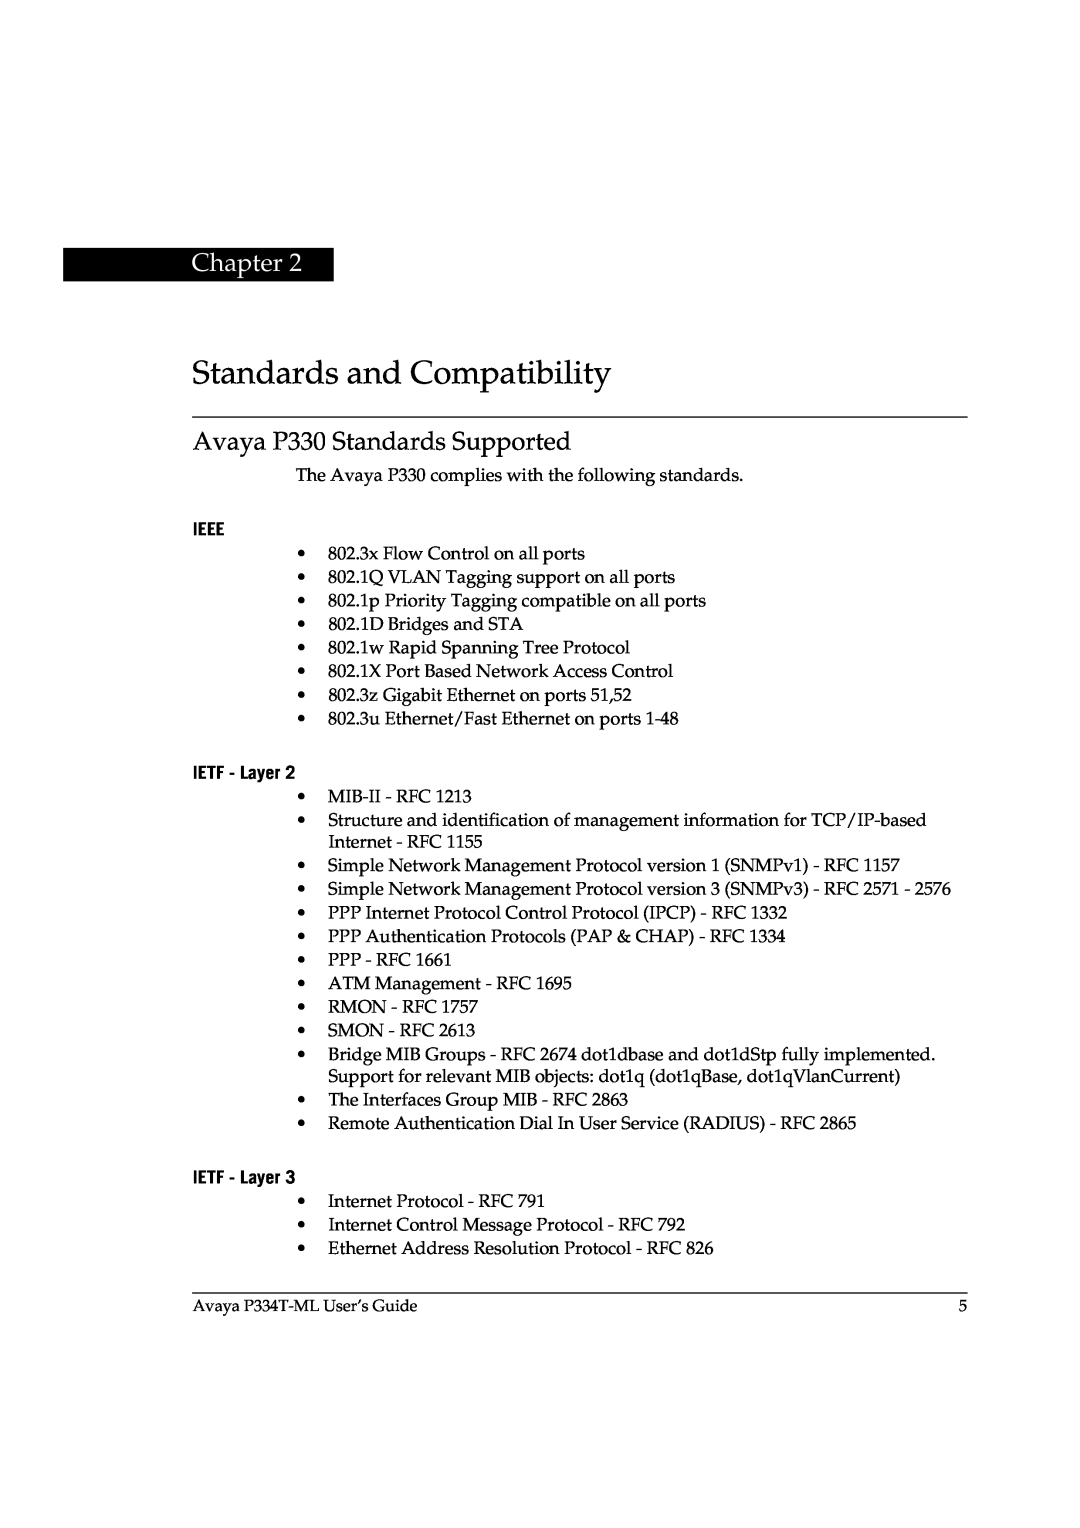 Avaya P3343T-ML manual Standards and Compatibility, Avaya P330 Standards Supported, Ieee, IETF - Layer, Chapter 